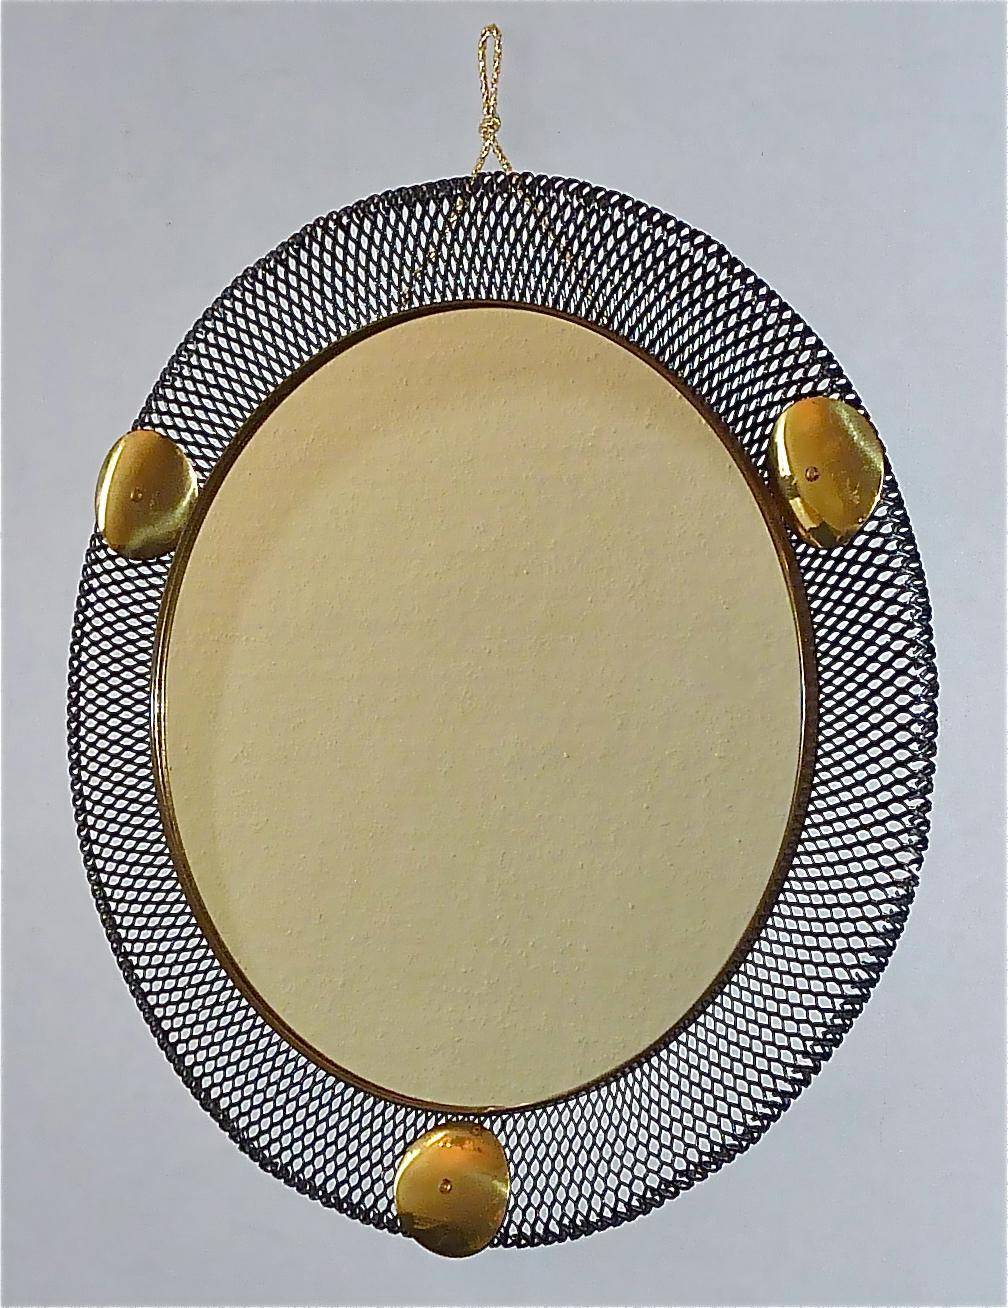 Enameled Pair Round Midcentury Wall Mirrors Brass Black Stretched Metal 1955 Mategot Biny For Sale